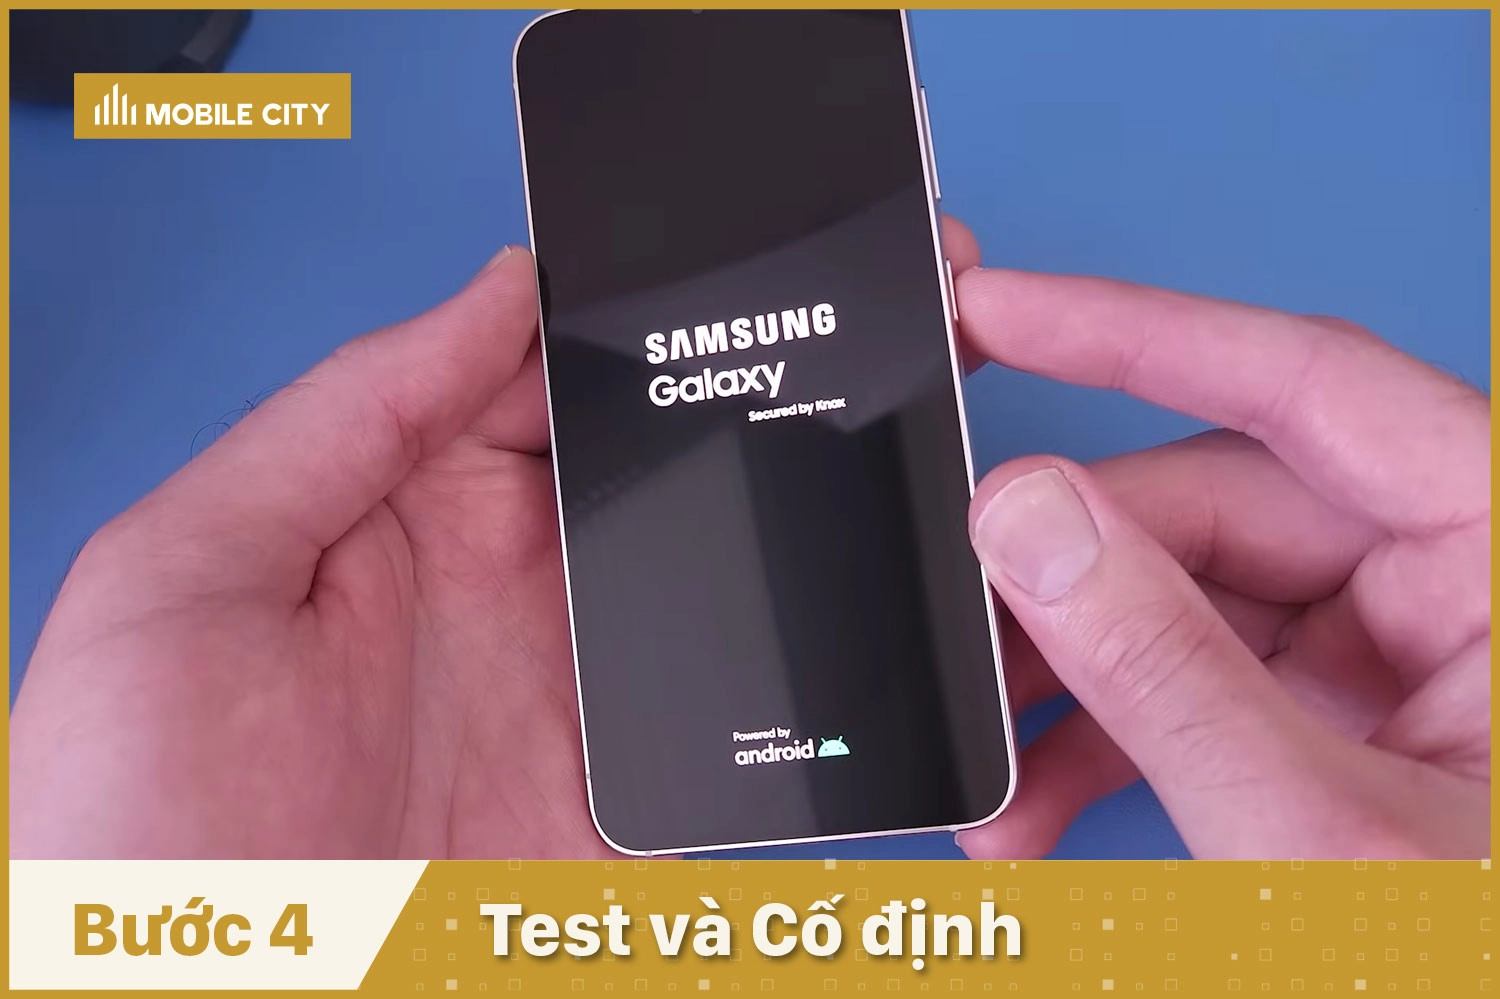 thay-mat-kinh-ep-kinh-samsung-galaxy-s24-test-co-dinh